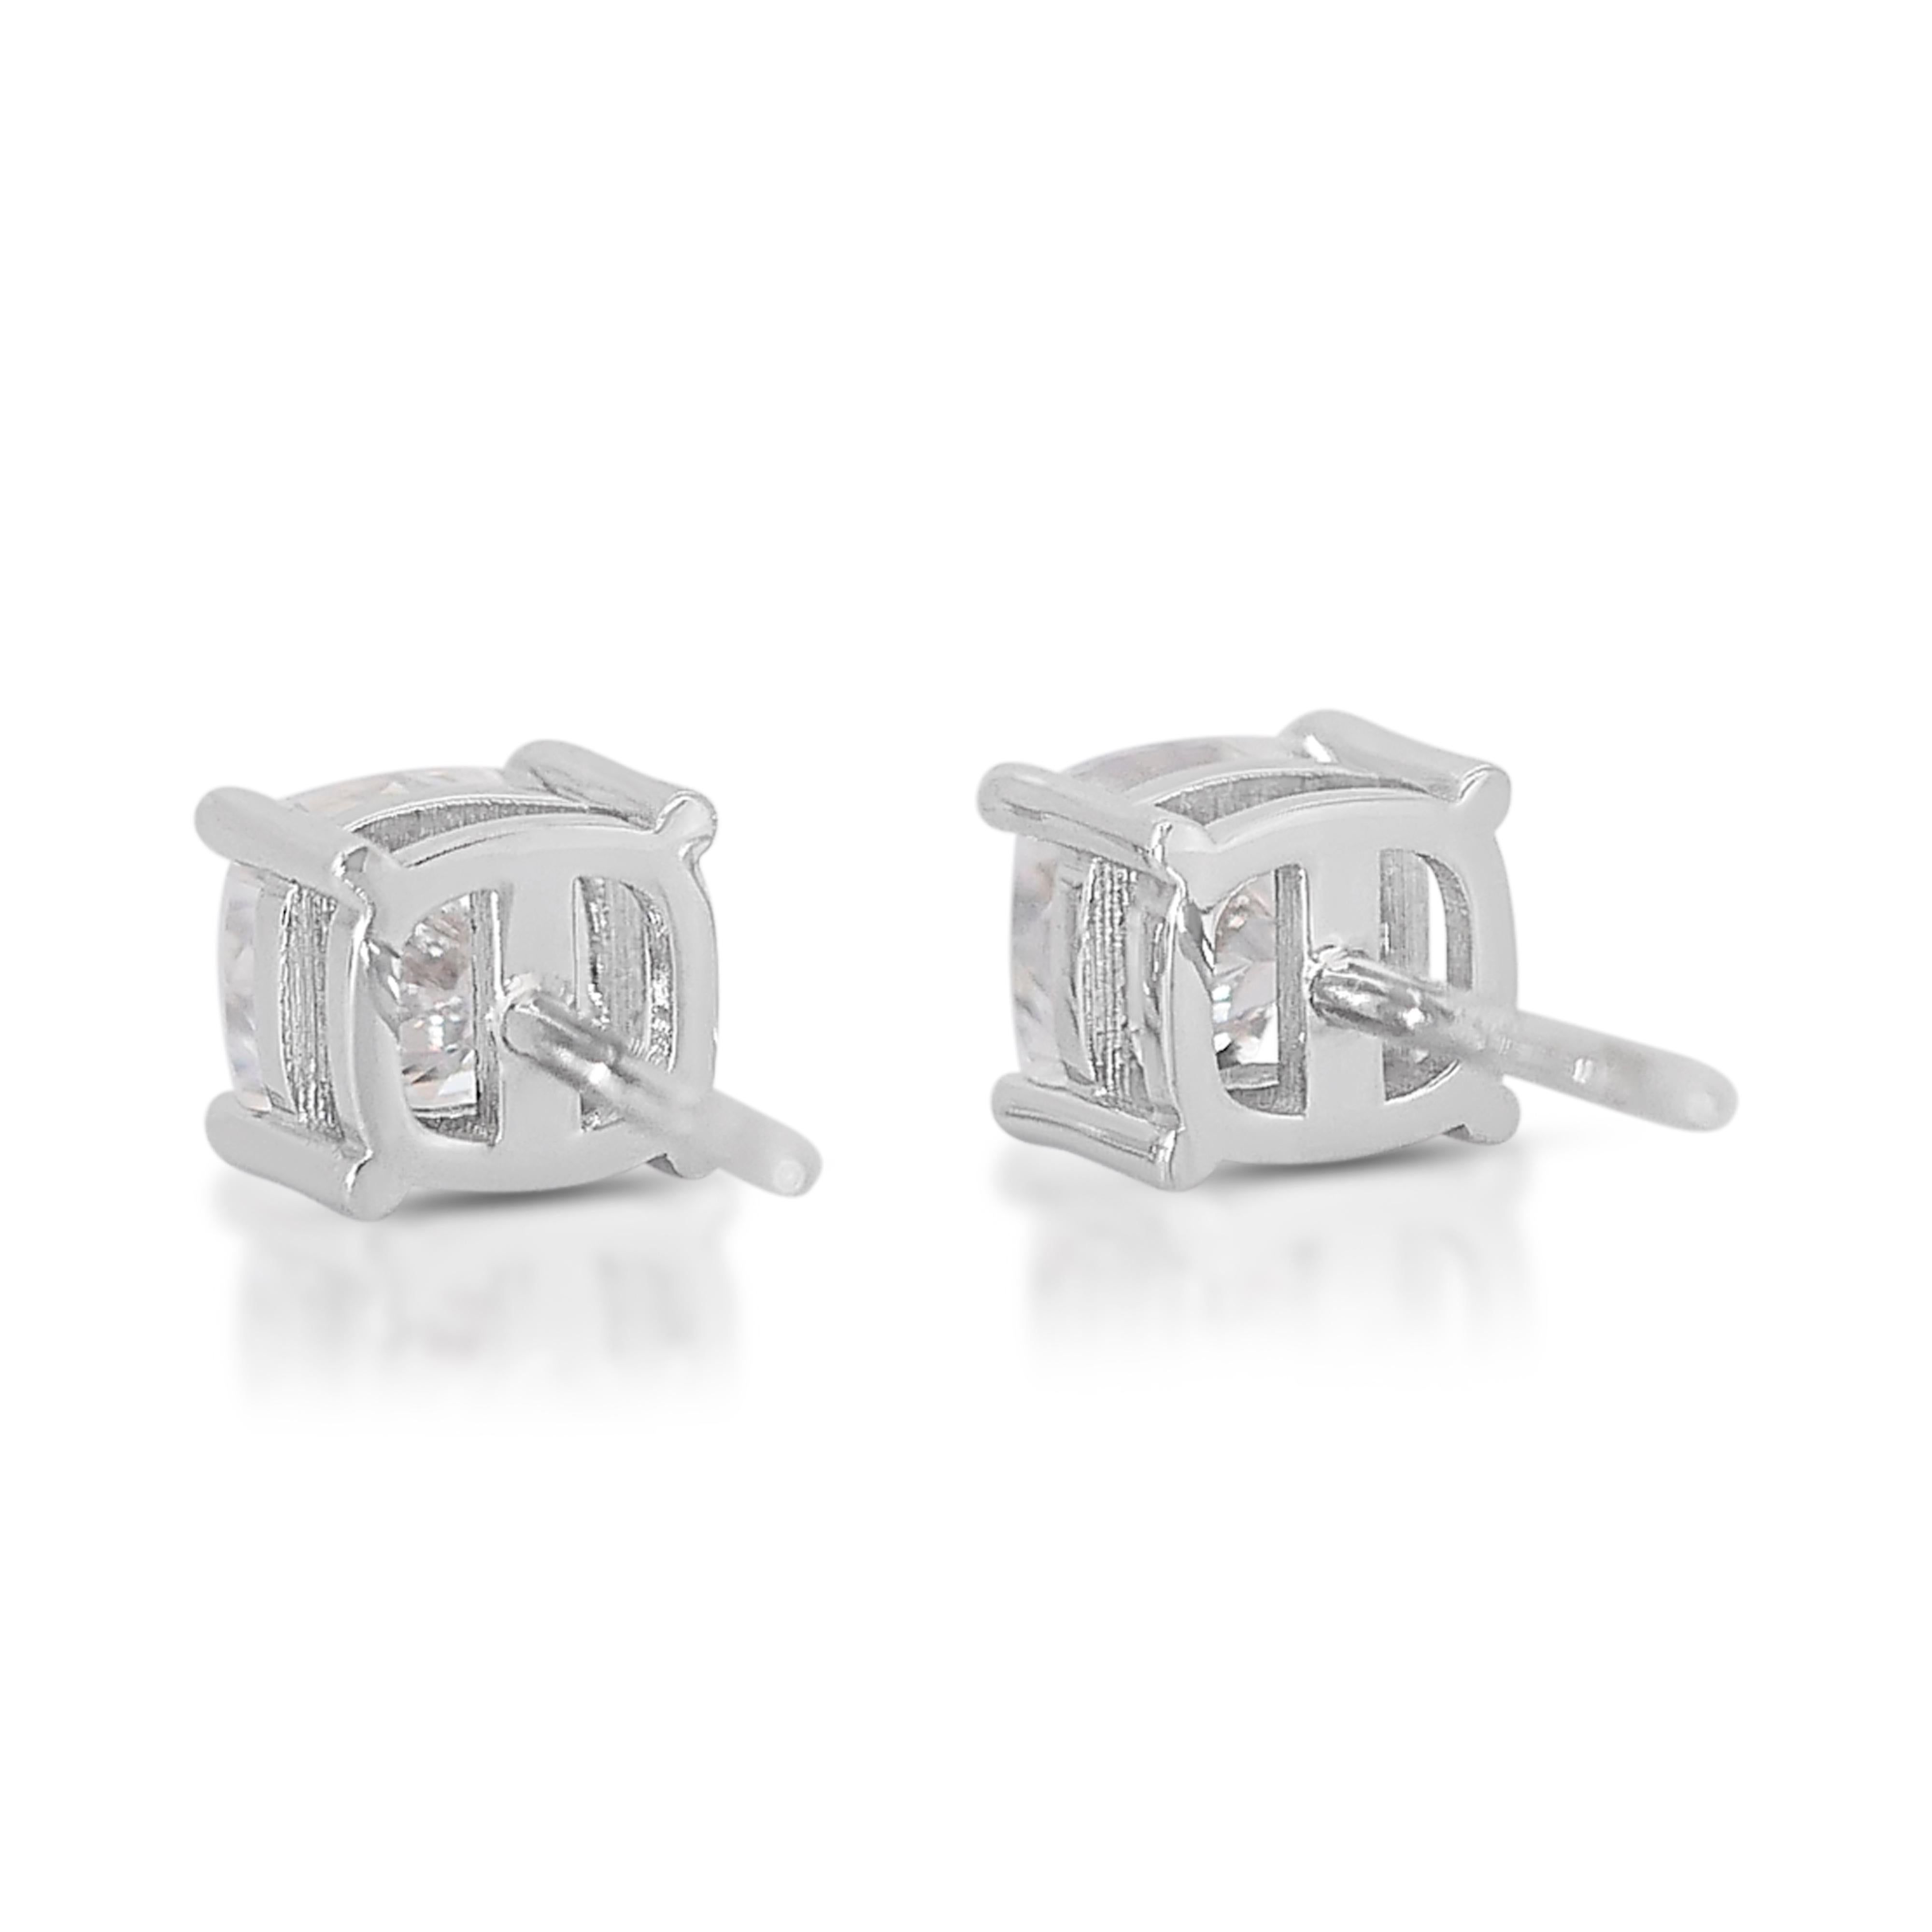 Lustrous 1.60ct Diamonds Stud Earrings in 18k White Gold - GIA Certified In New Condition For Sale In רמת גן, IL